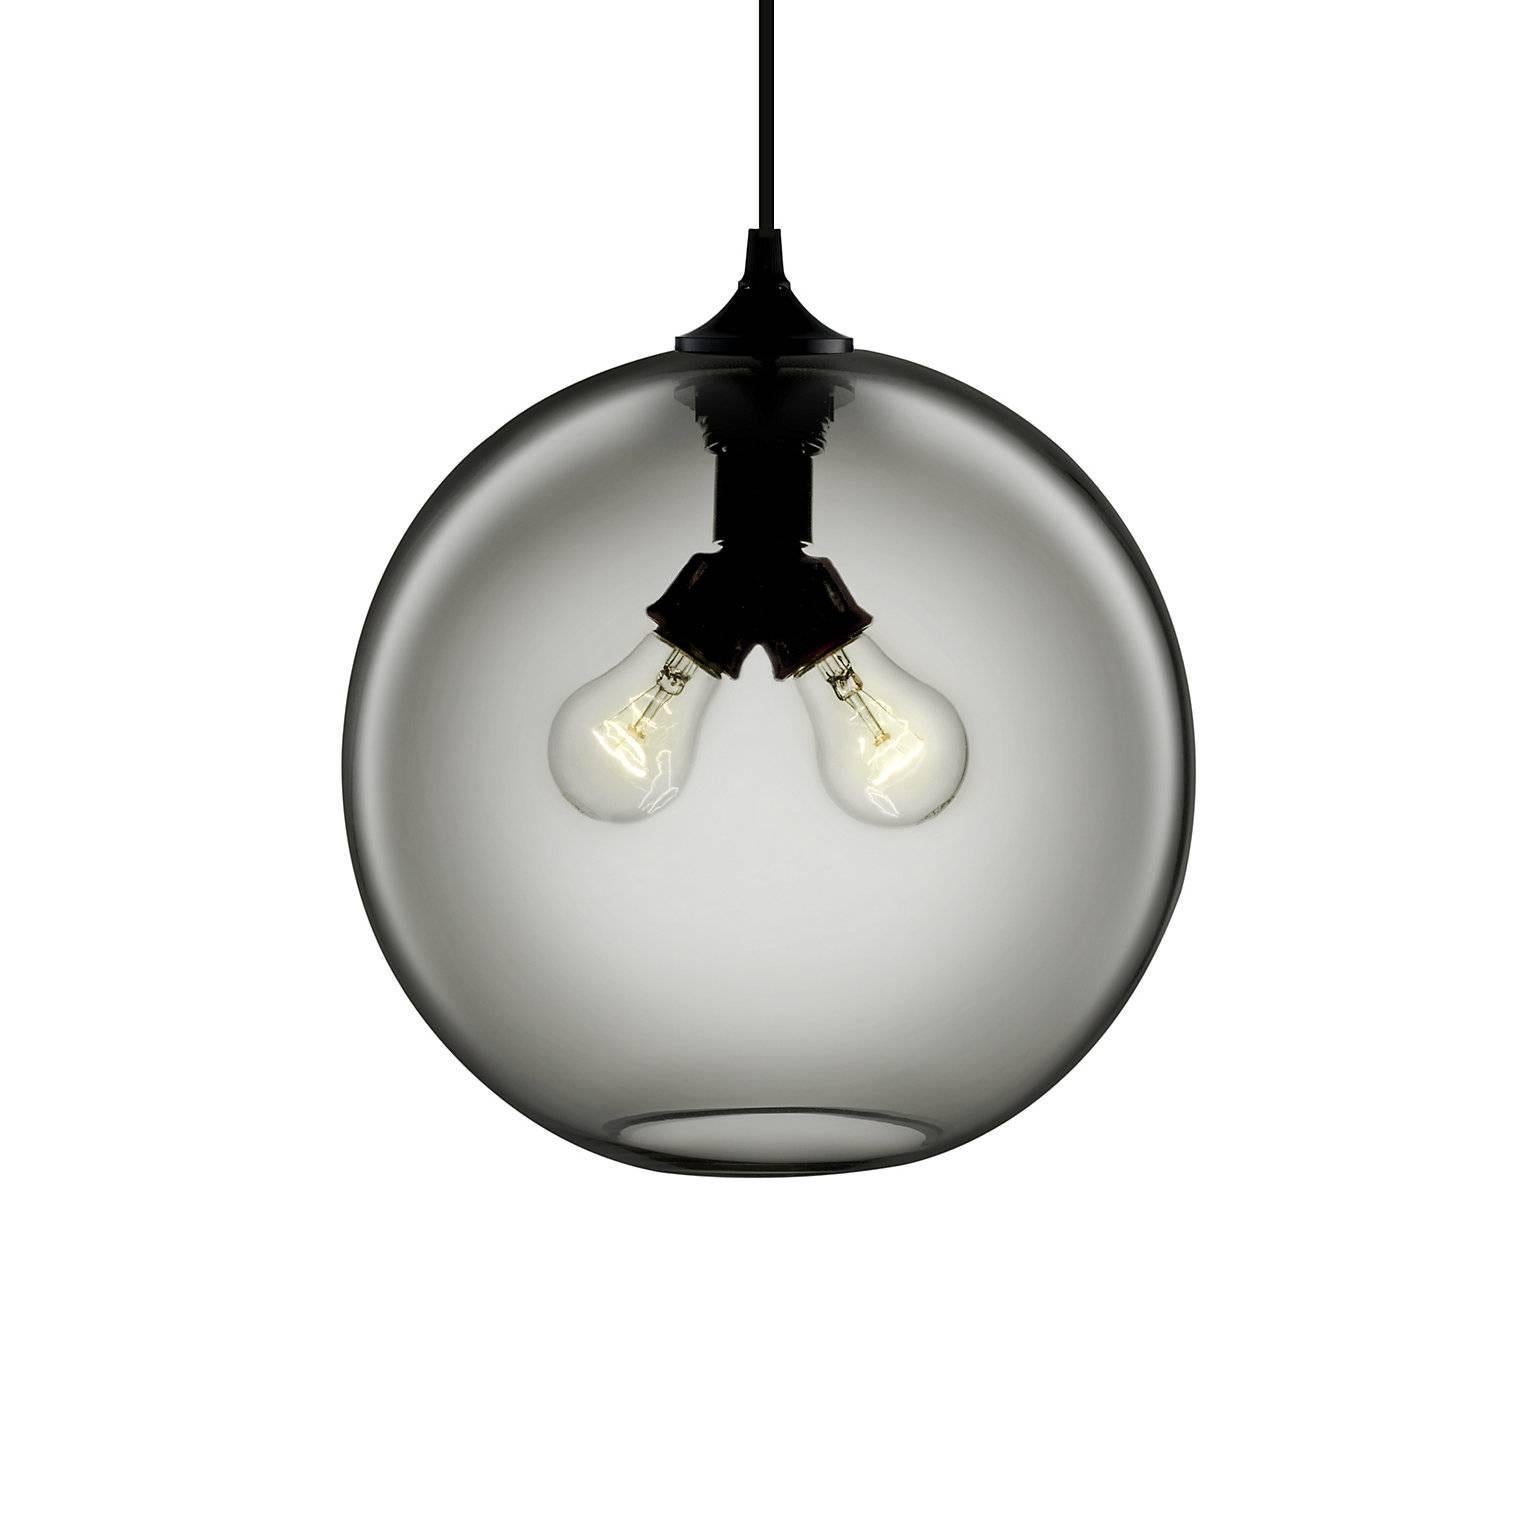 The allure of the Binary pendant is the presence of two bulbs at the pendant’s centre, radiating rich, ambient light. Every single glass pendant light that comes from Niche is handblown by real human beings in a state-of-the-art studio located in